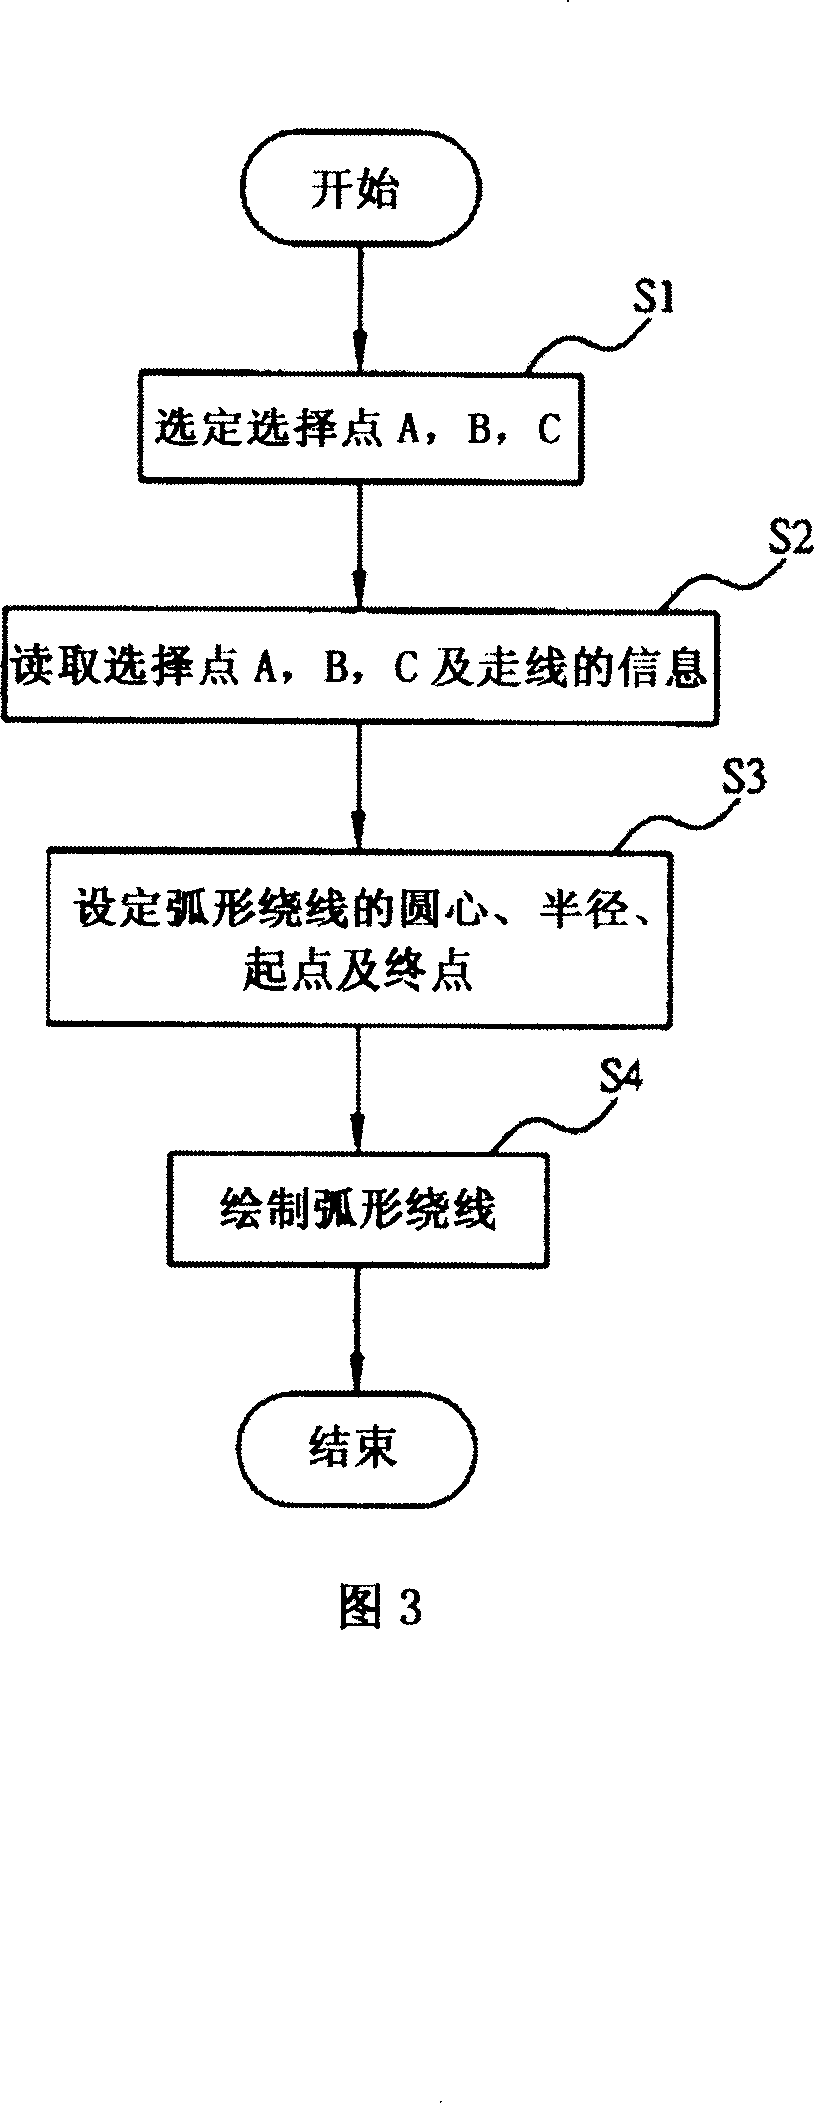 Arc-shape winding system and method